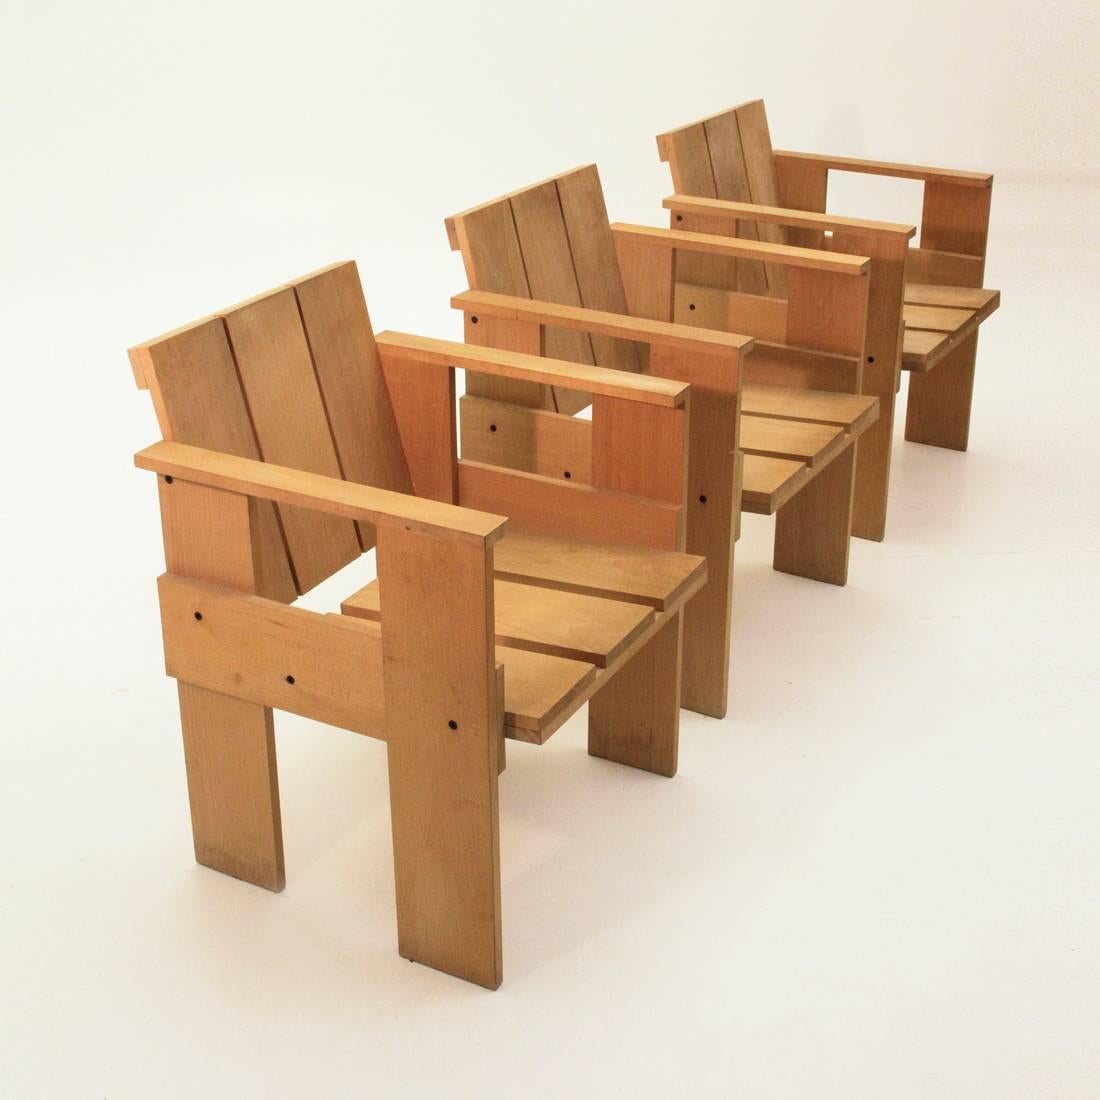 De Stijl Set of Six Crate Chairs by Gerrit Rietveld for Cassina